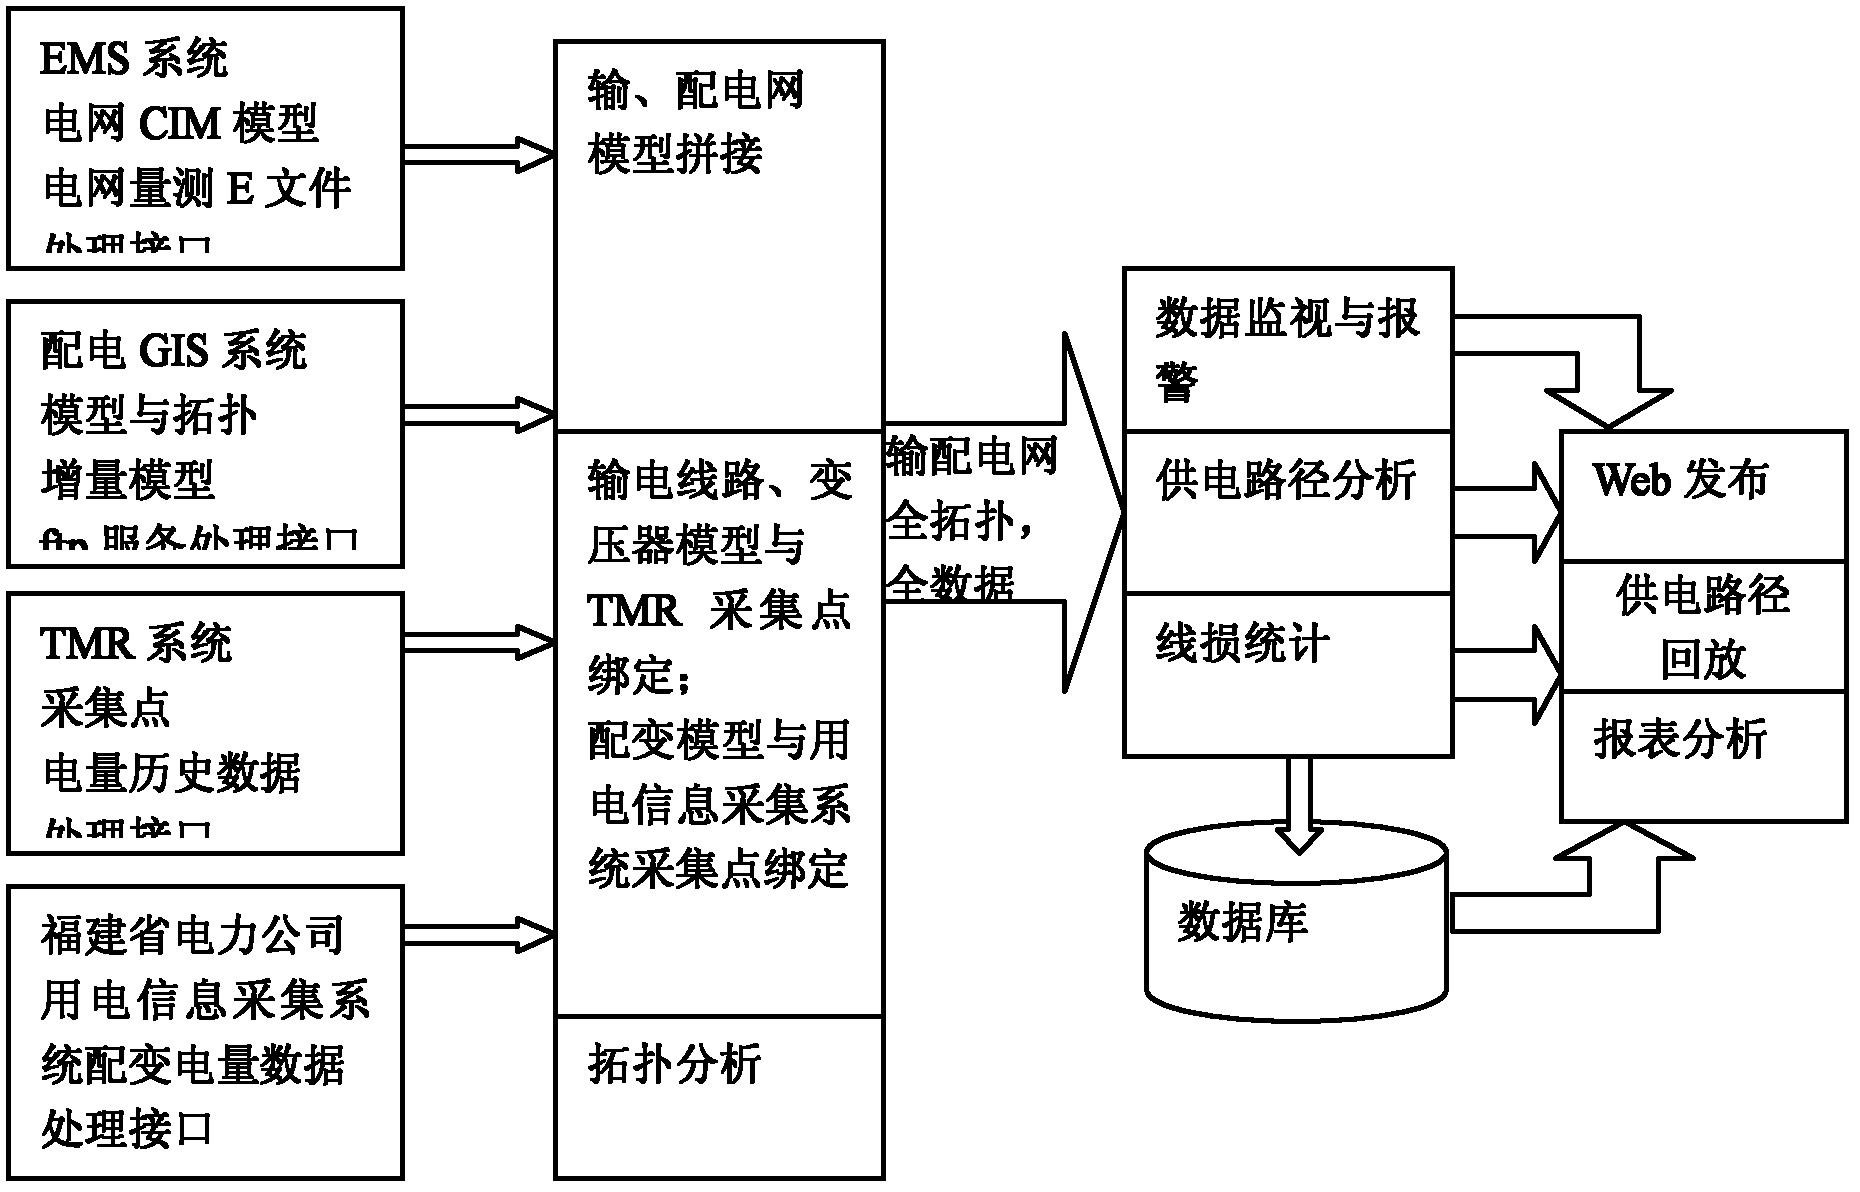 Transmission and distribution network integration comprehensive line loss management analysis system and processing flow thereof